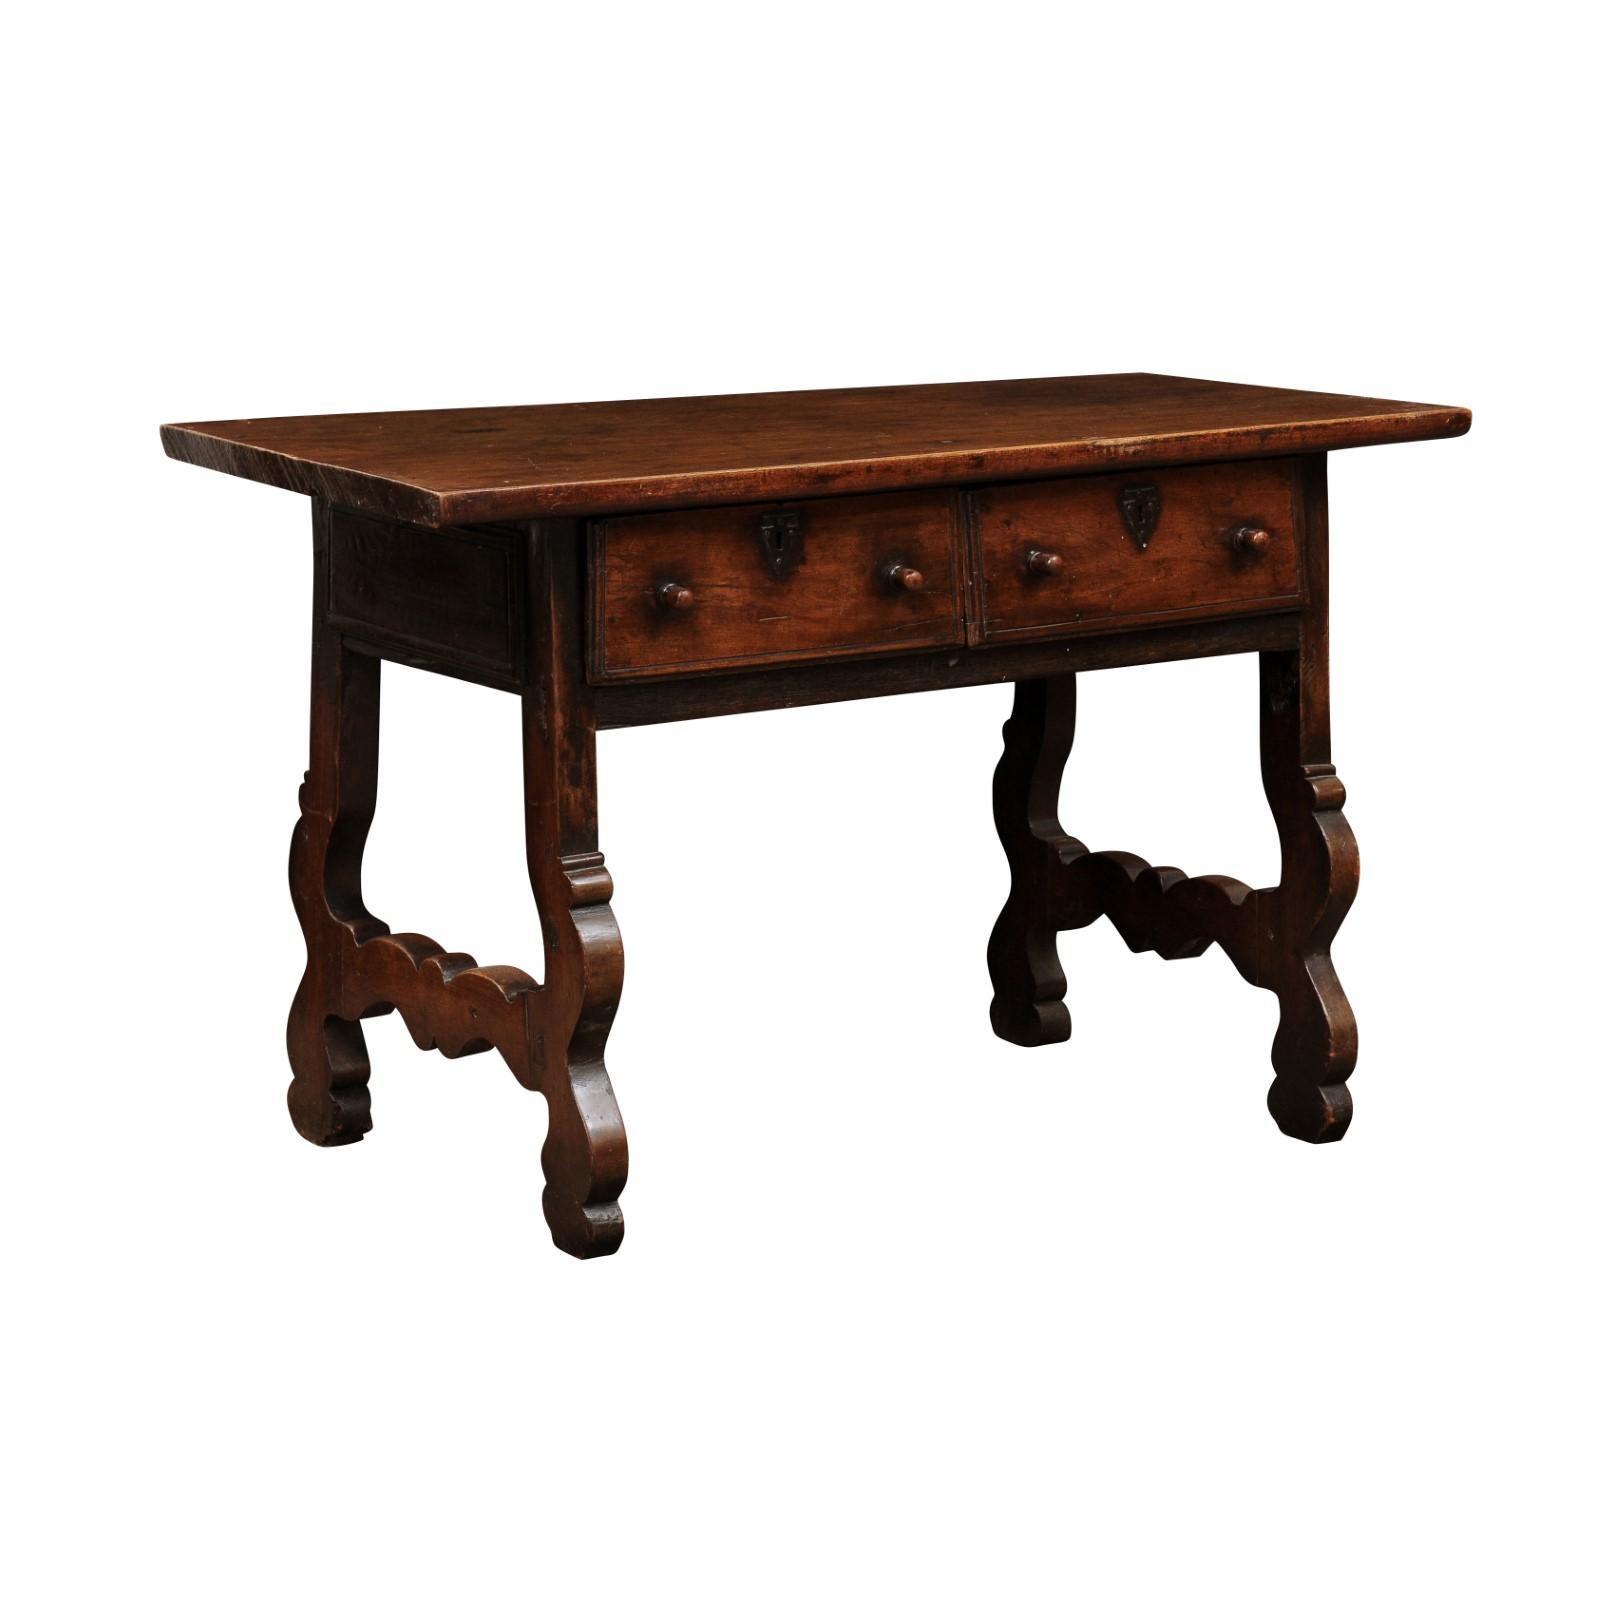 Spanish Walnut Console Table with 2 Drawers and Lyre Legs, Early 18th Century In Good Condition For Sale In Atlanta, GA